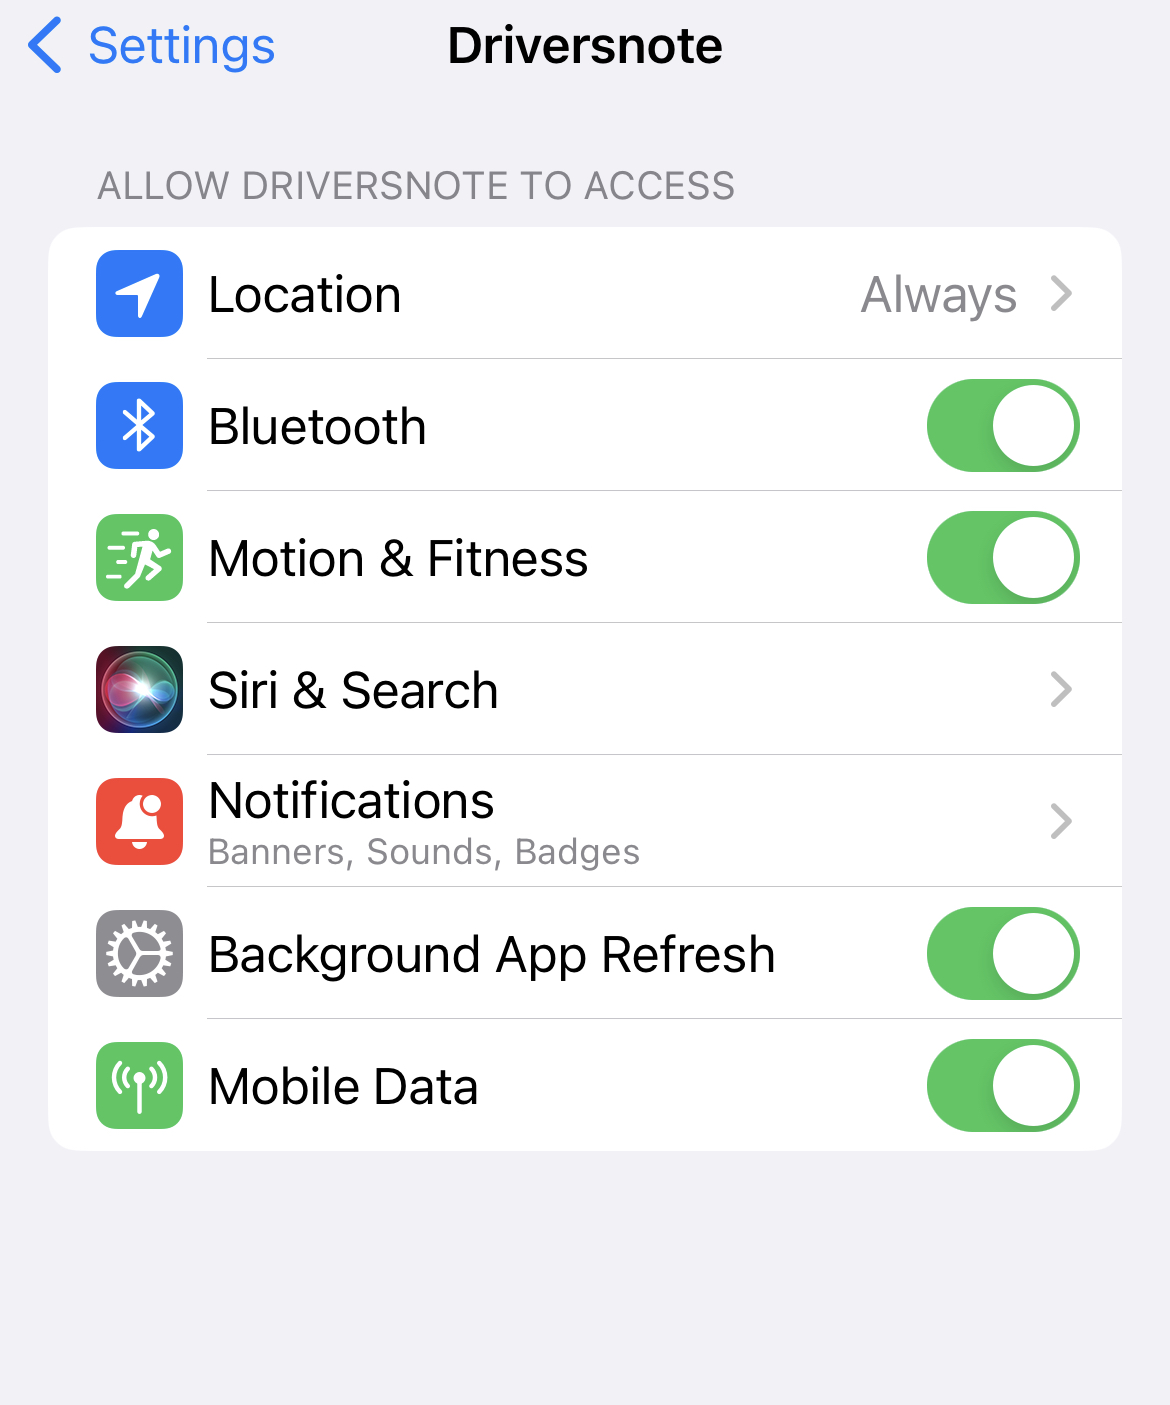 Driversnote settings for iPhone 